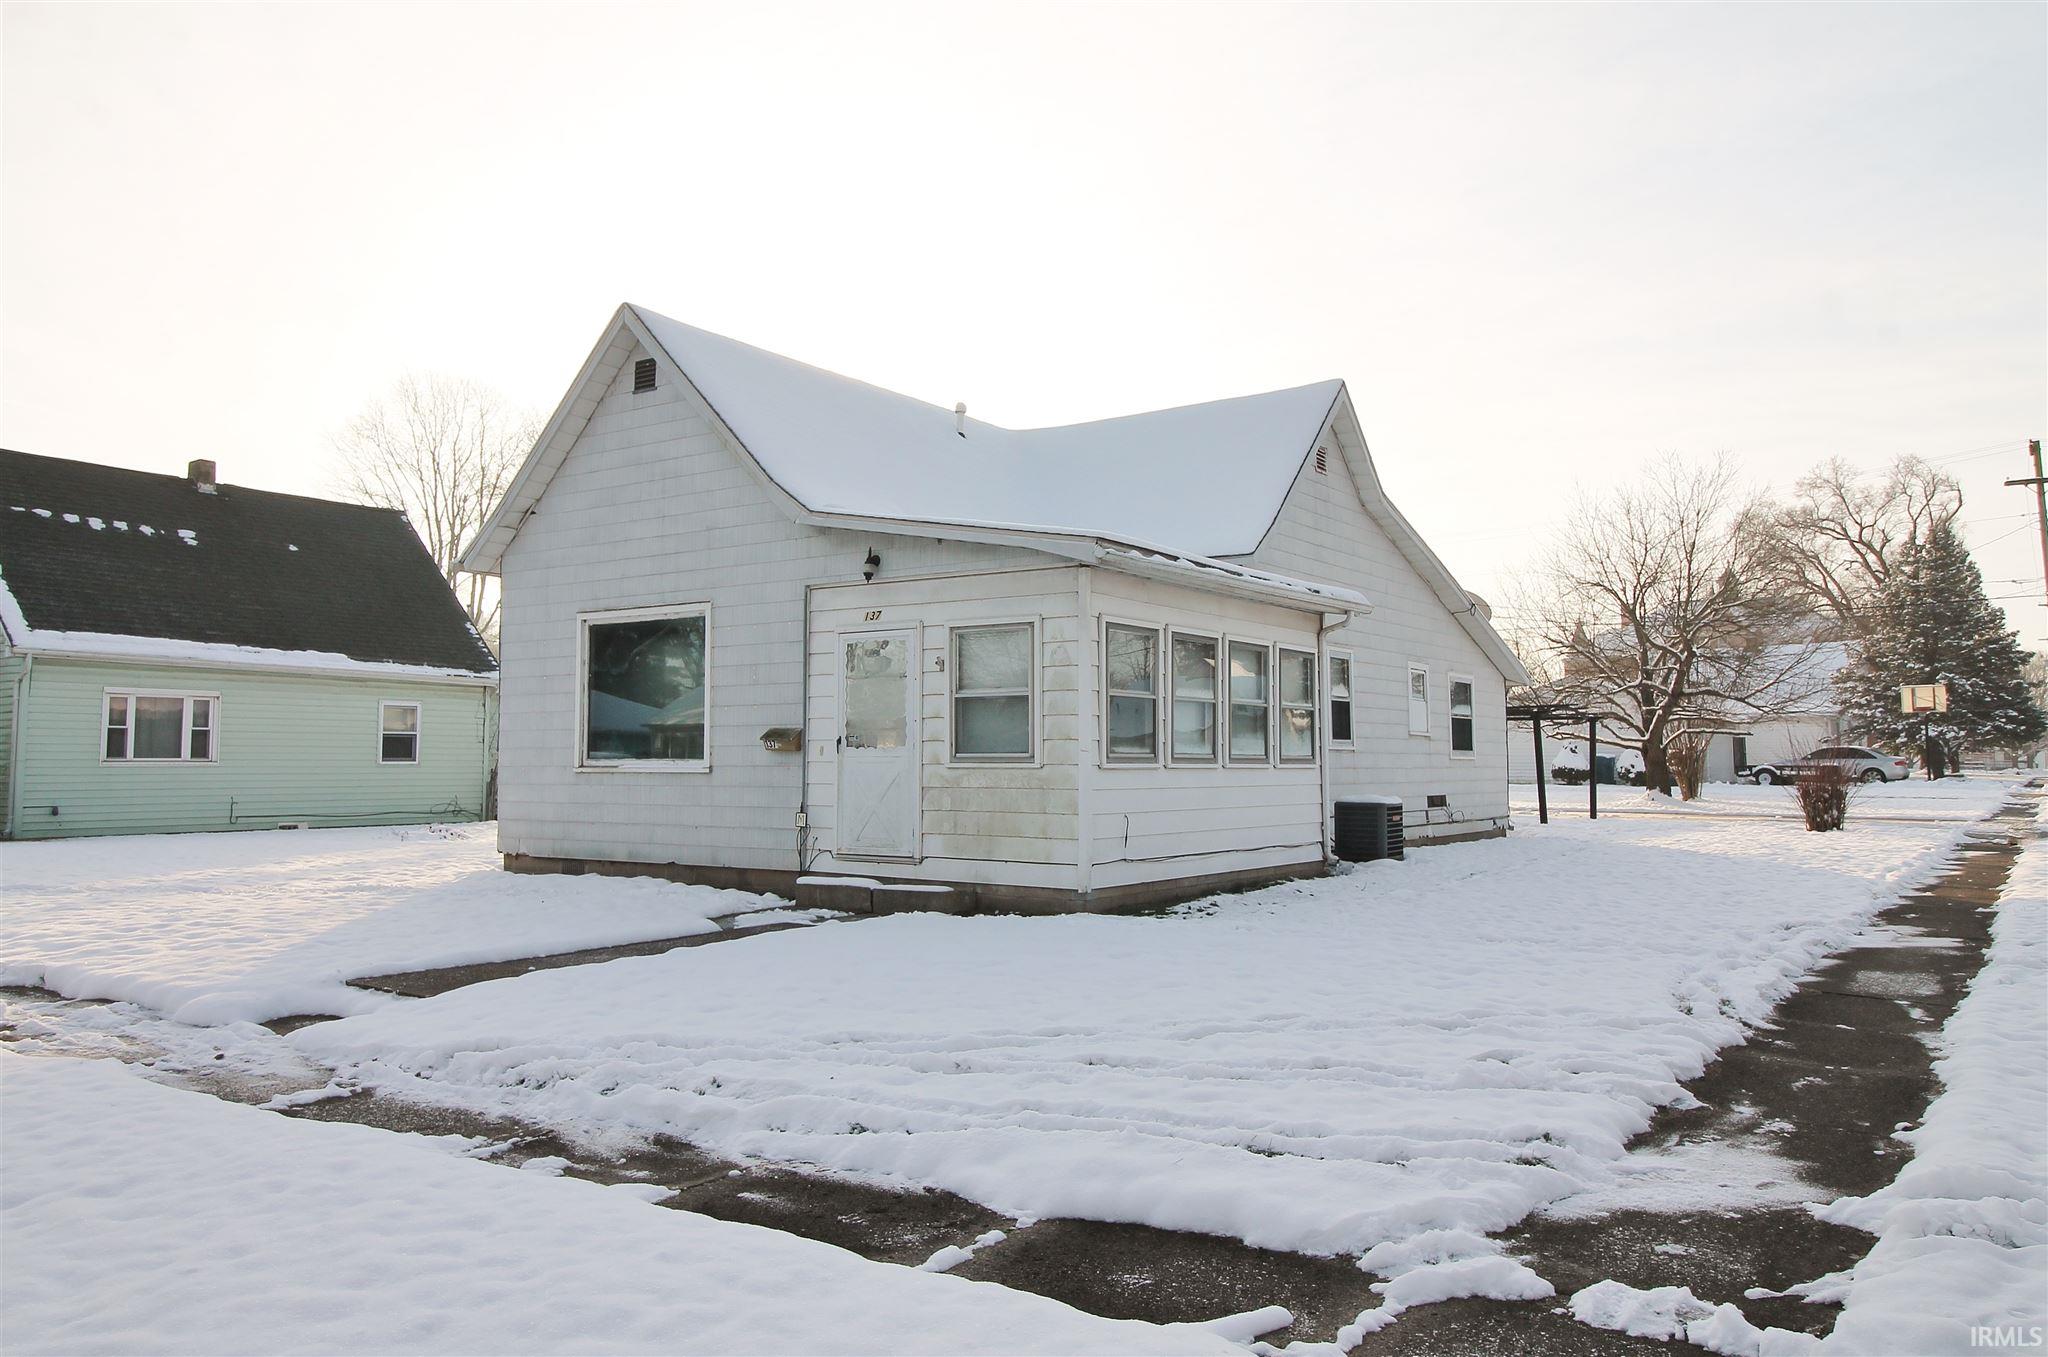 Property Details for 137 W North C Street, Gas City, IN ...